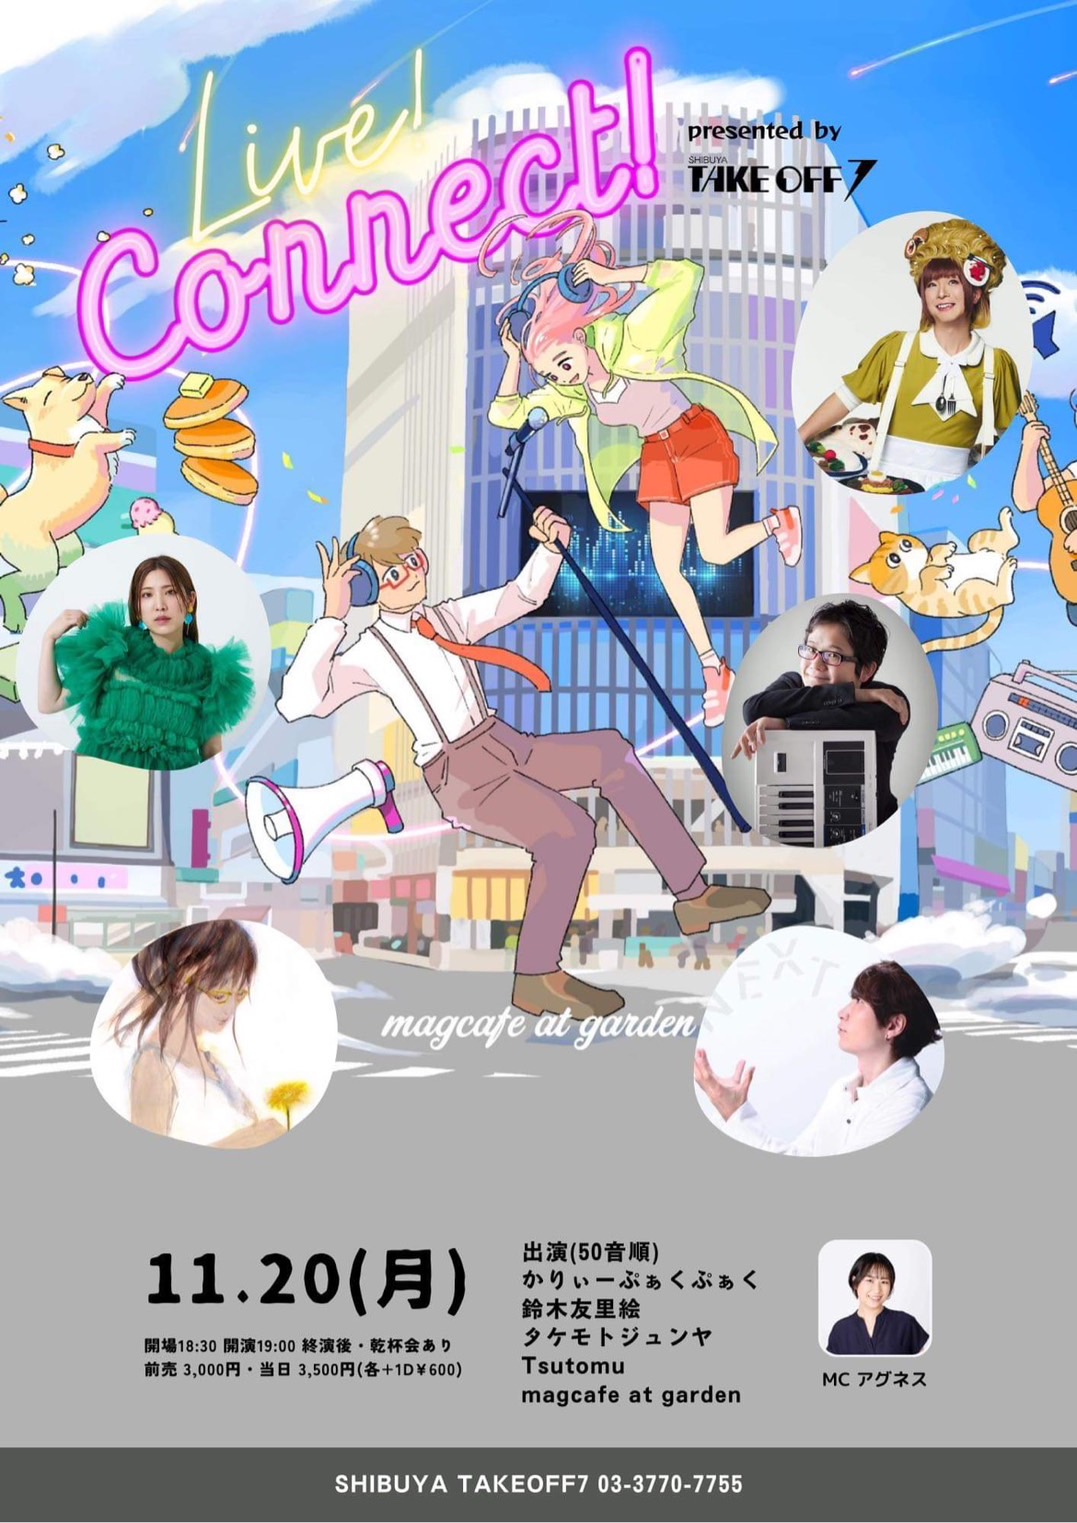 LIVE Connect!! presented by SHIBUYA TAKEOFF7